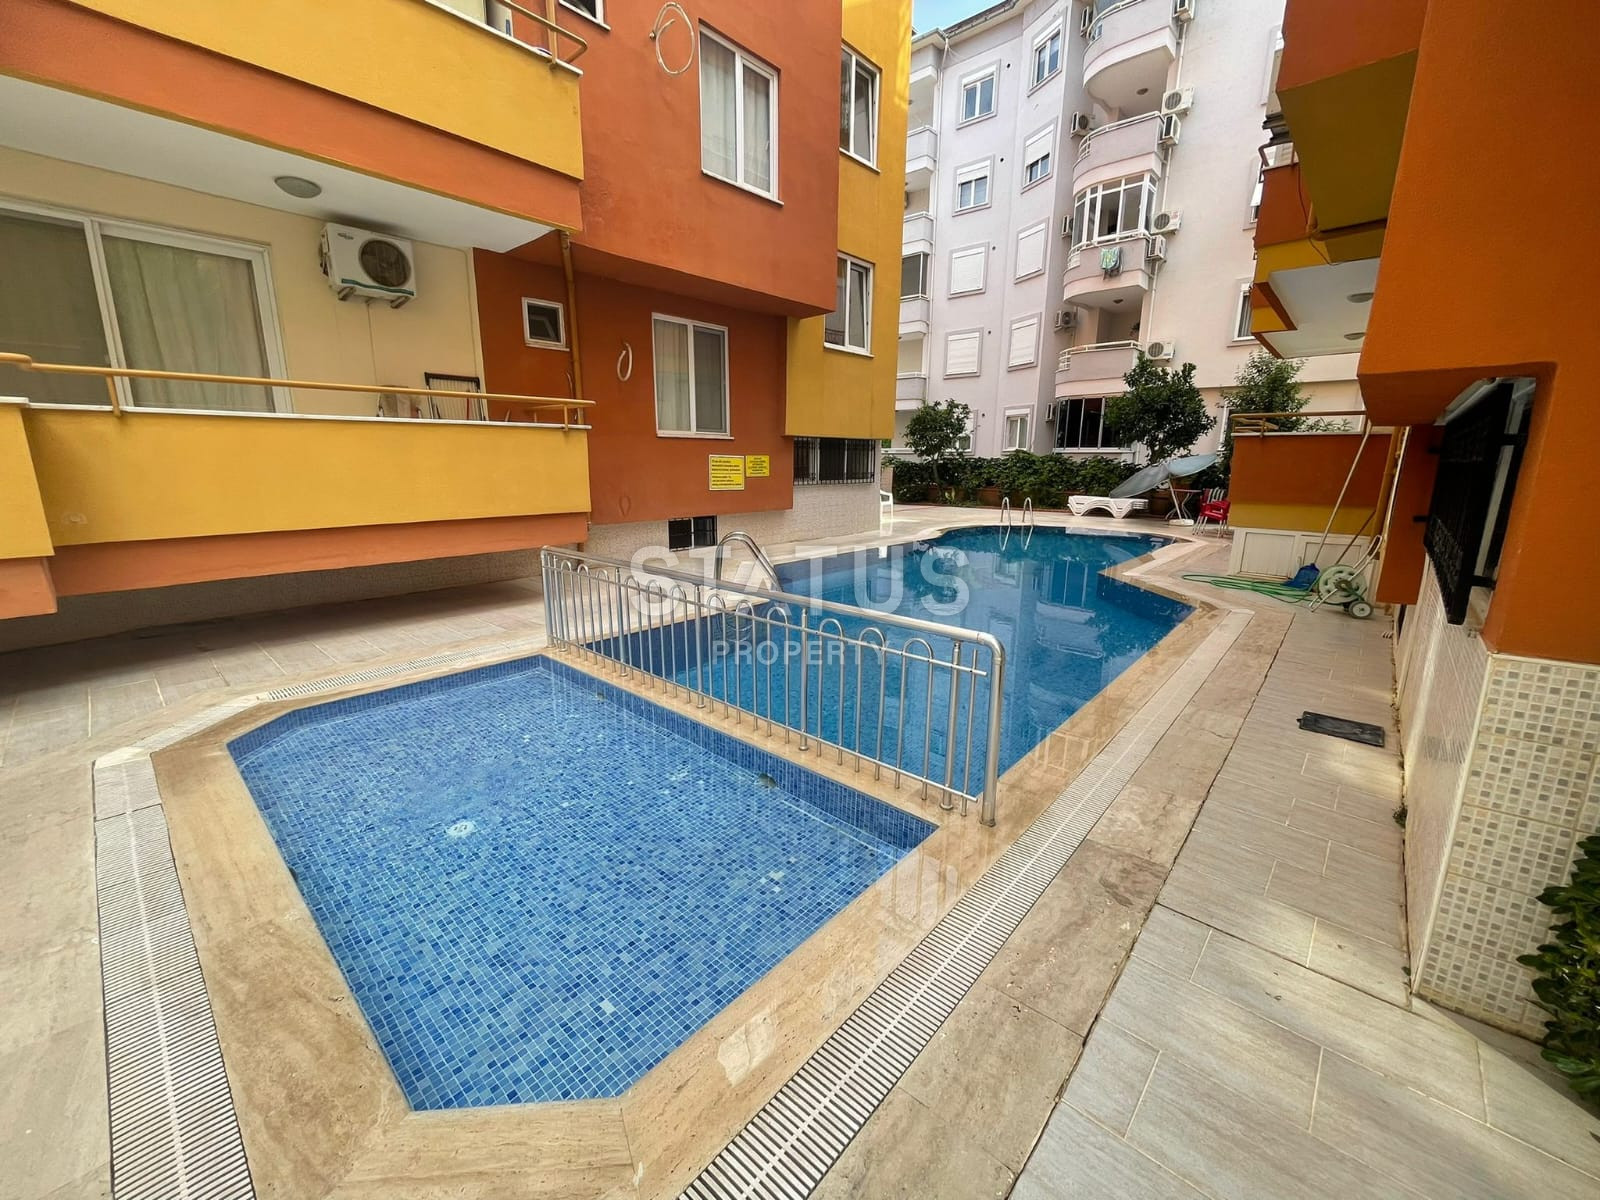 Very spacious 1+1 apartment in the lower part of Oba, 150m from the sea. 70m2 фото 1